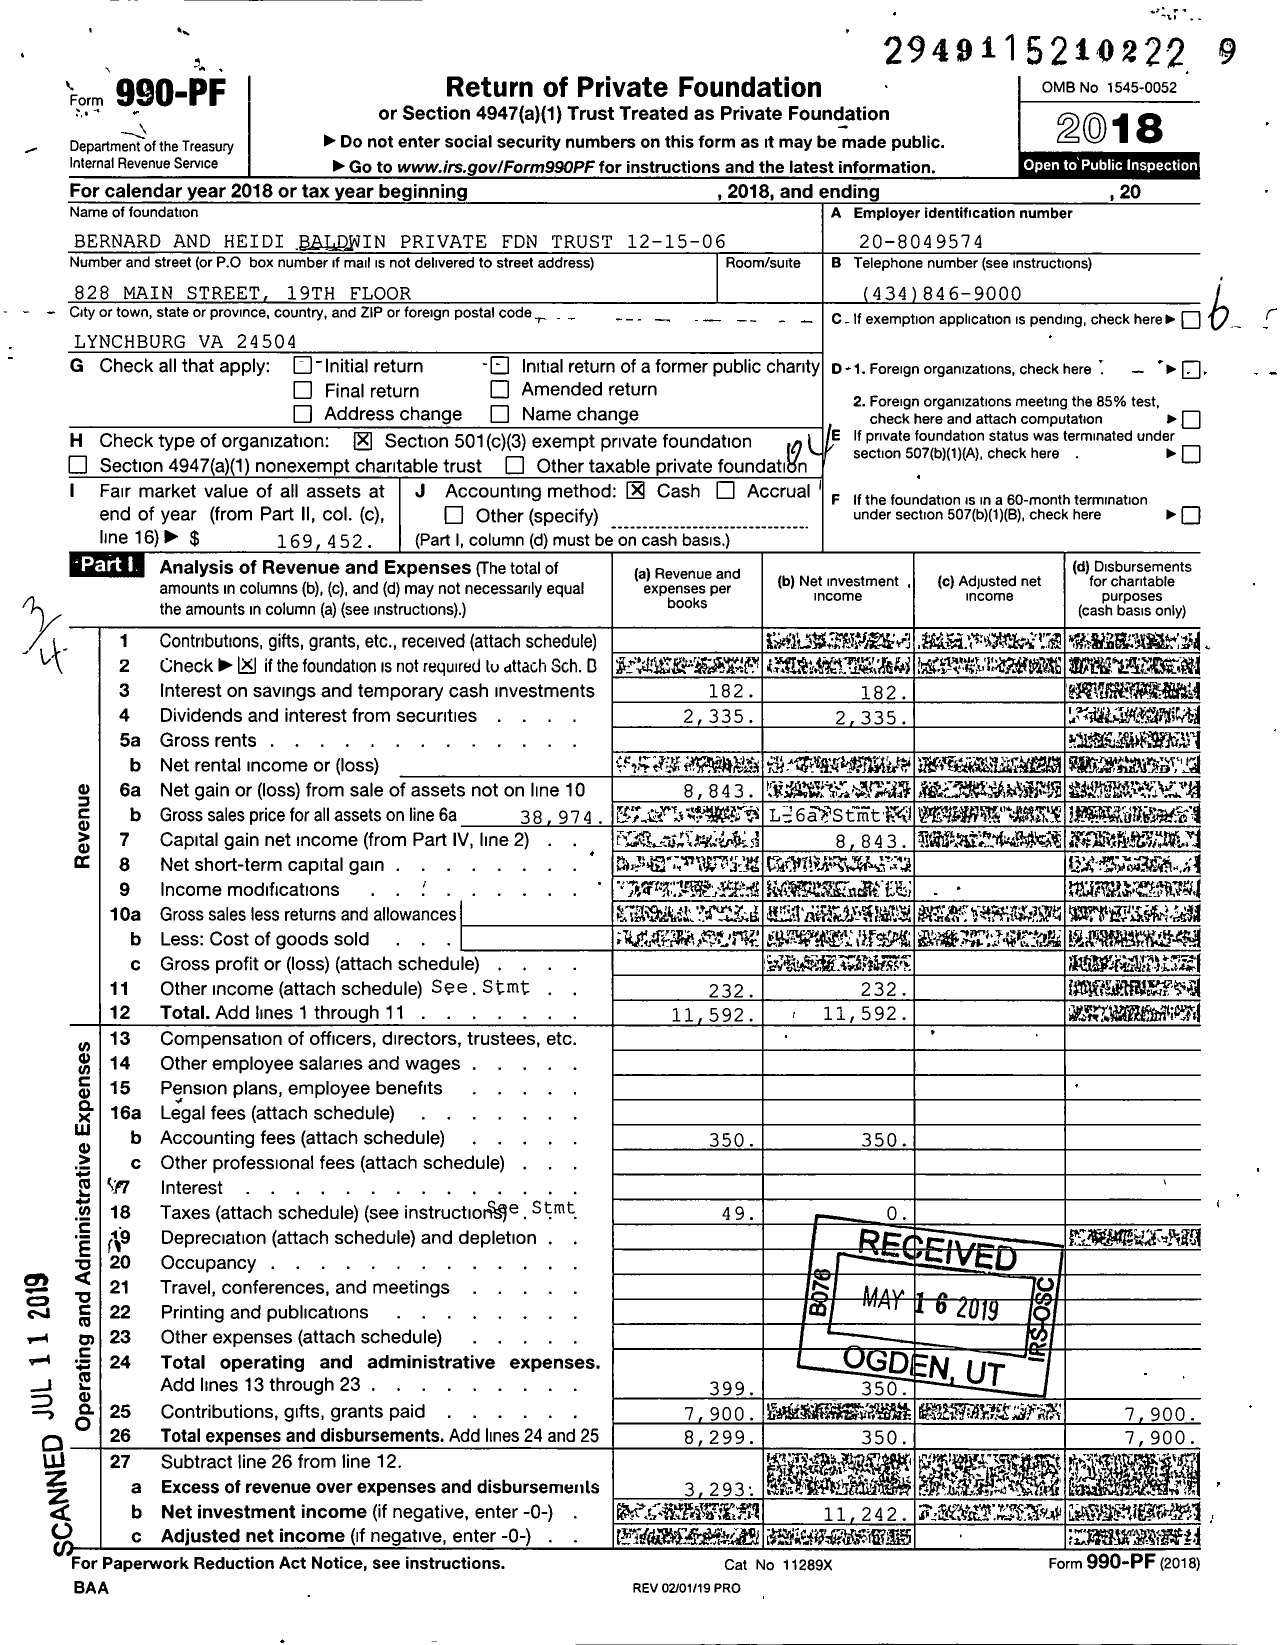 Image of first page of 2018 Form 990PF for Bernard and Heidi Baldwin Private Foundation Trust 12-15-06